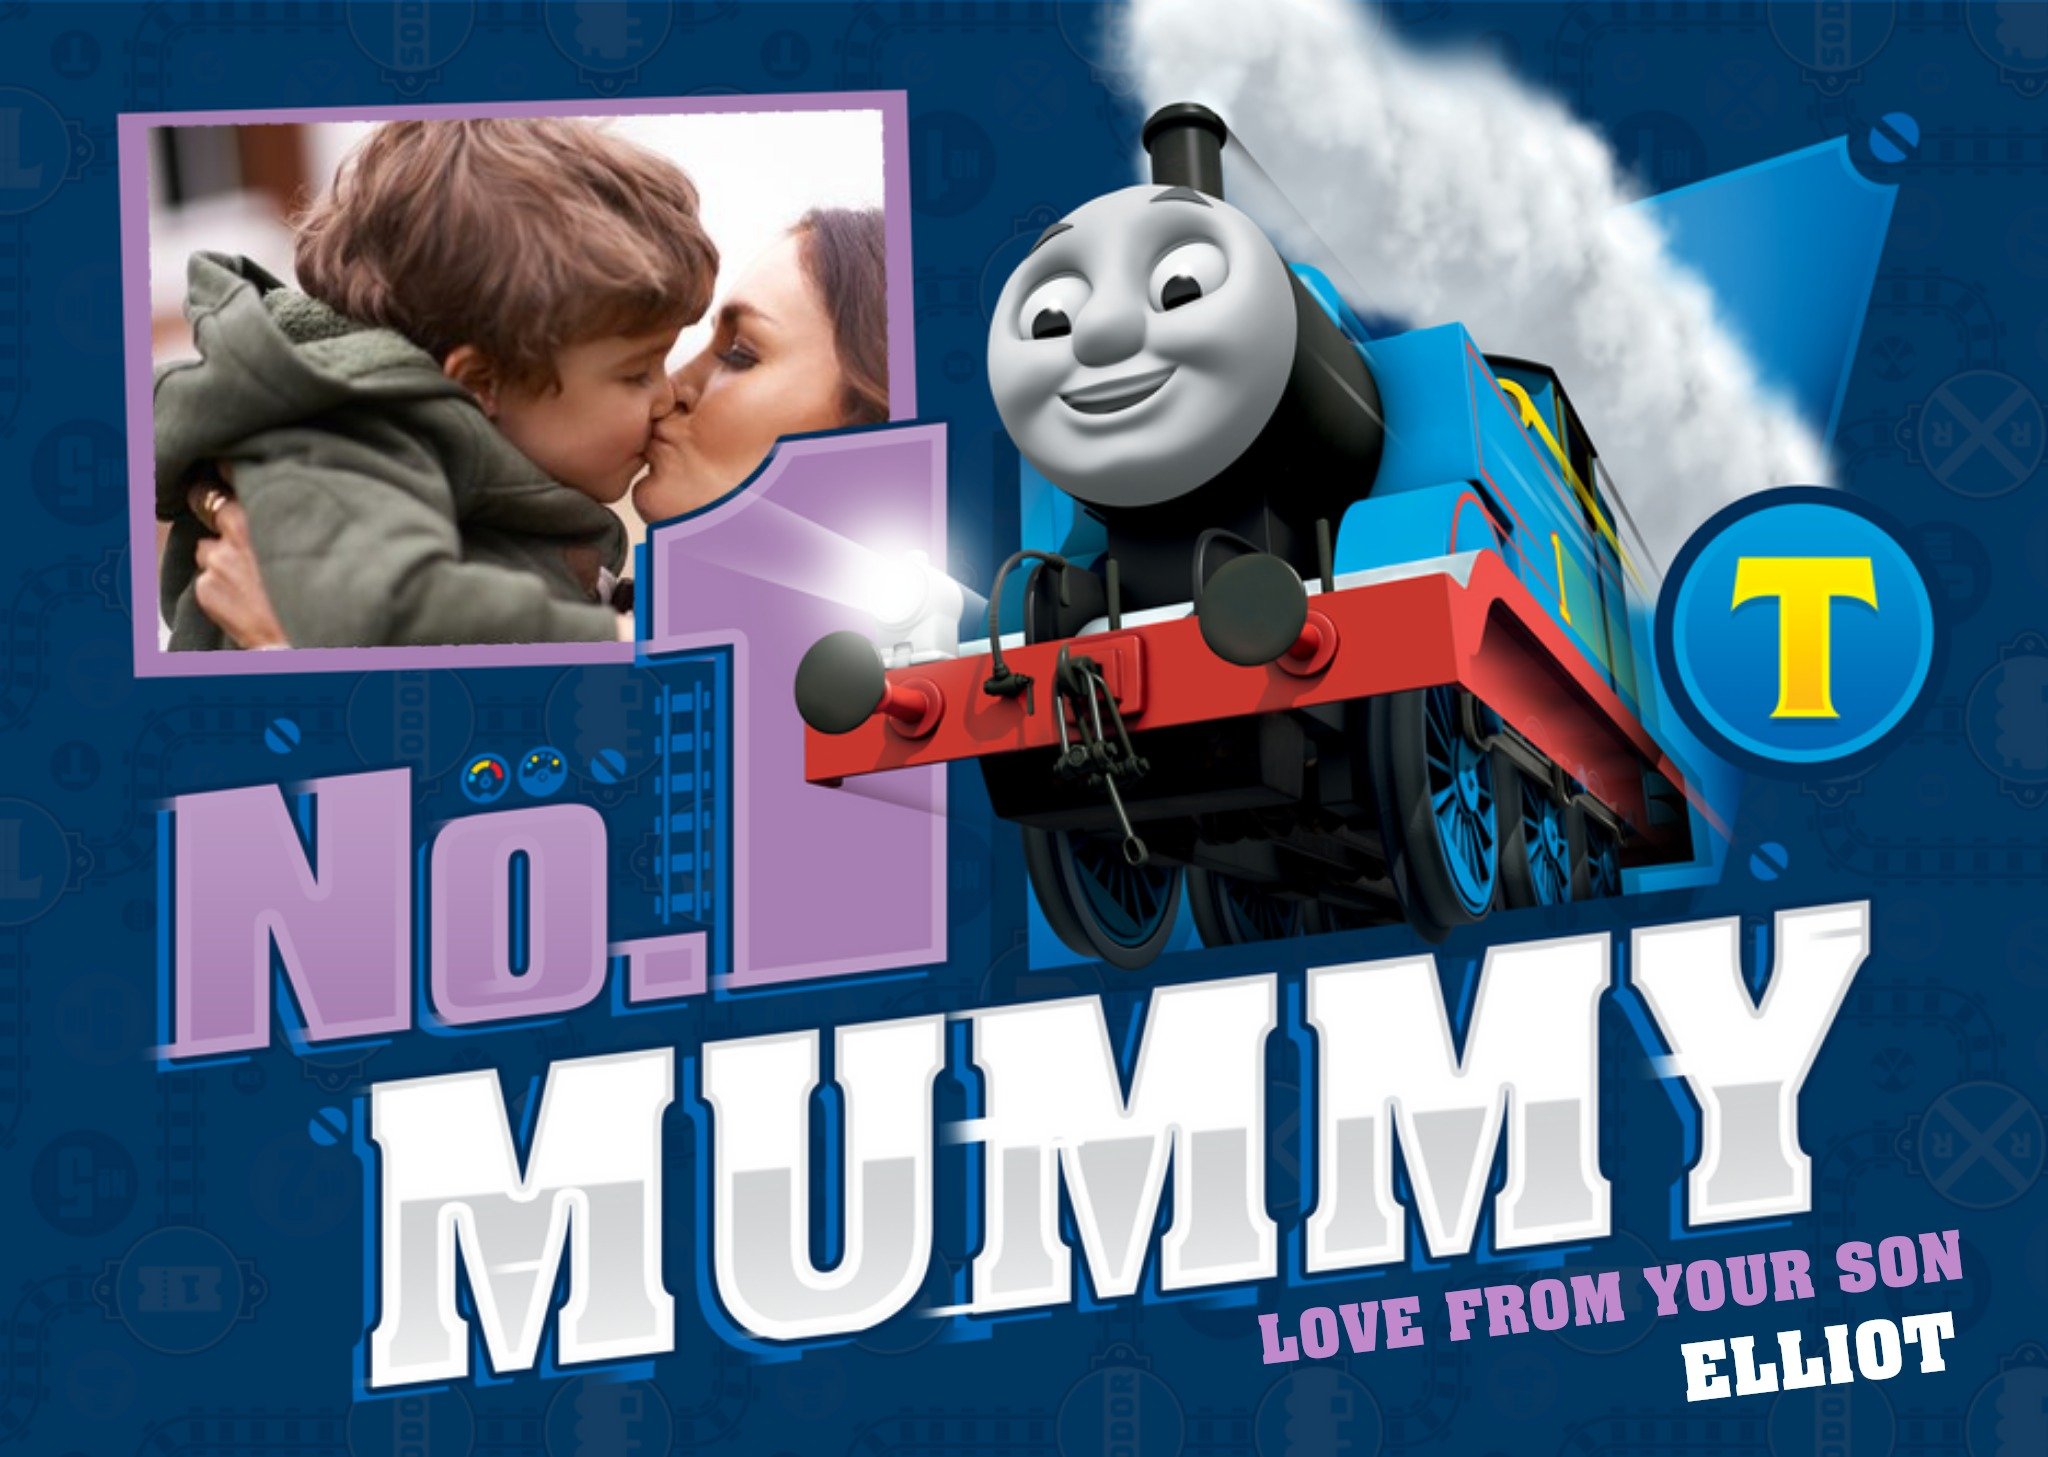 Thomas & Friends Mother's Day Card - Thomas The Tank Engine - Photo Upload Card, Large